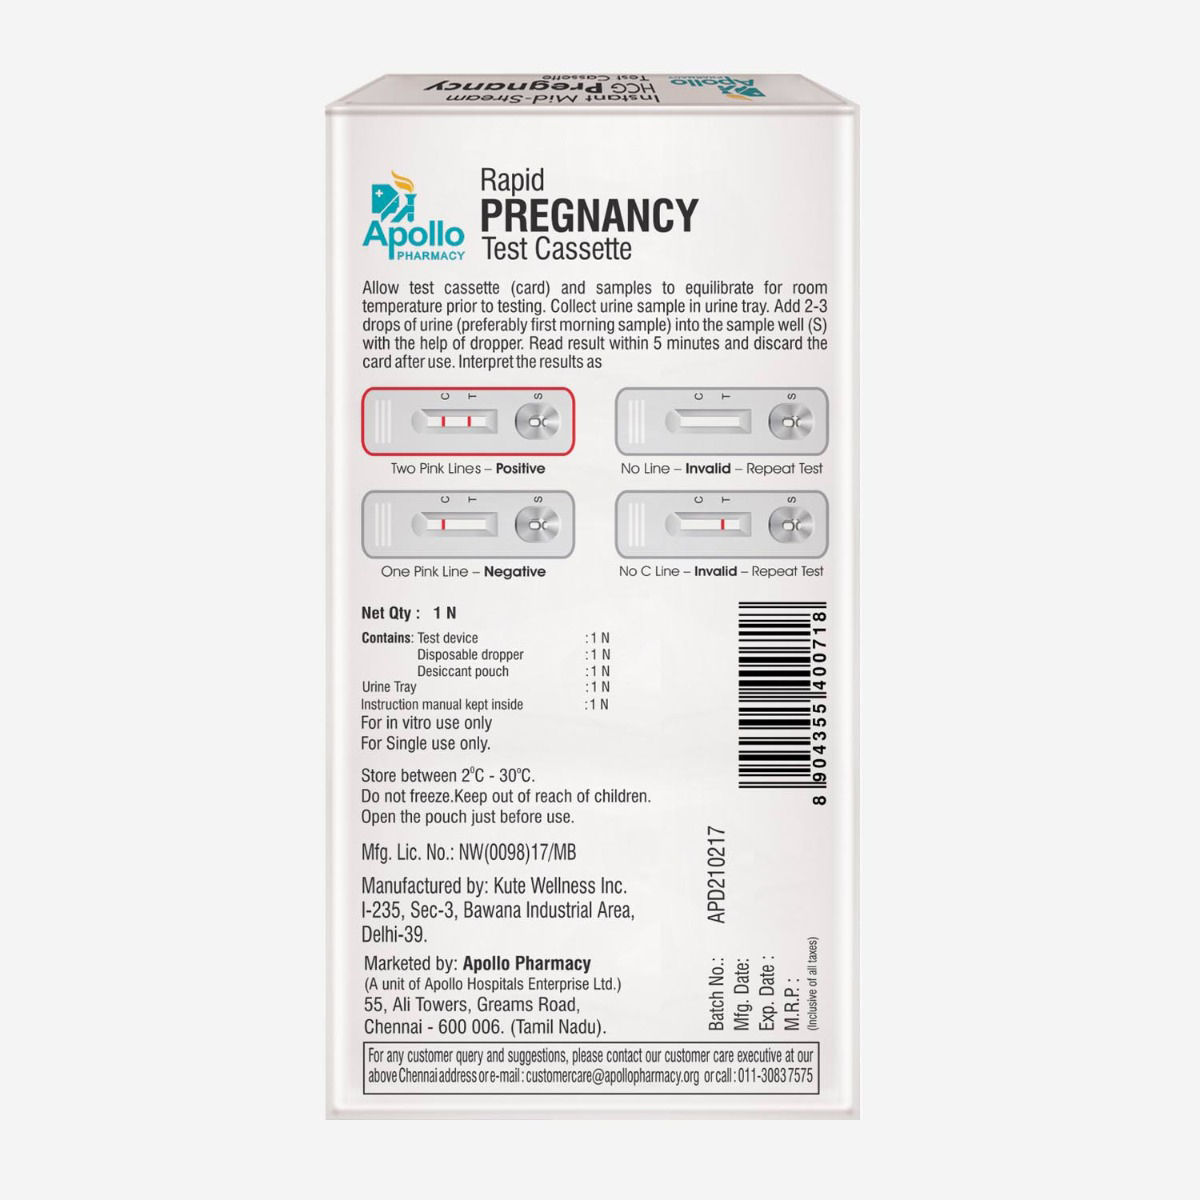 Apollo Pharmacy Rapid Pregnancy Test Cassette, 1 Count, Pack of 1 